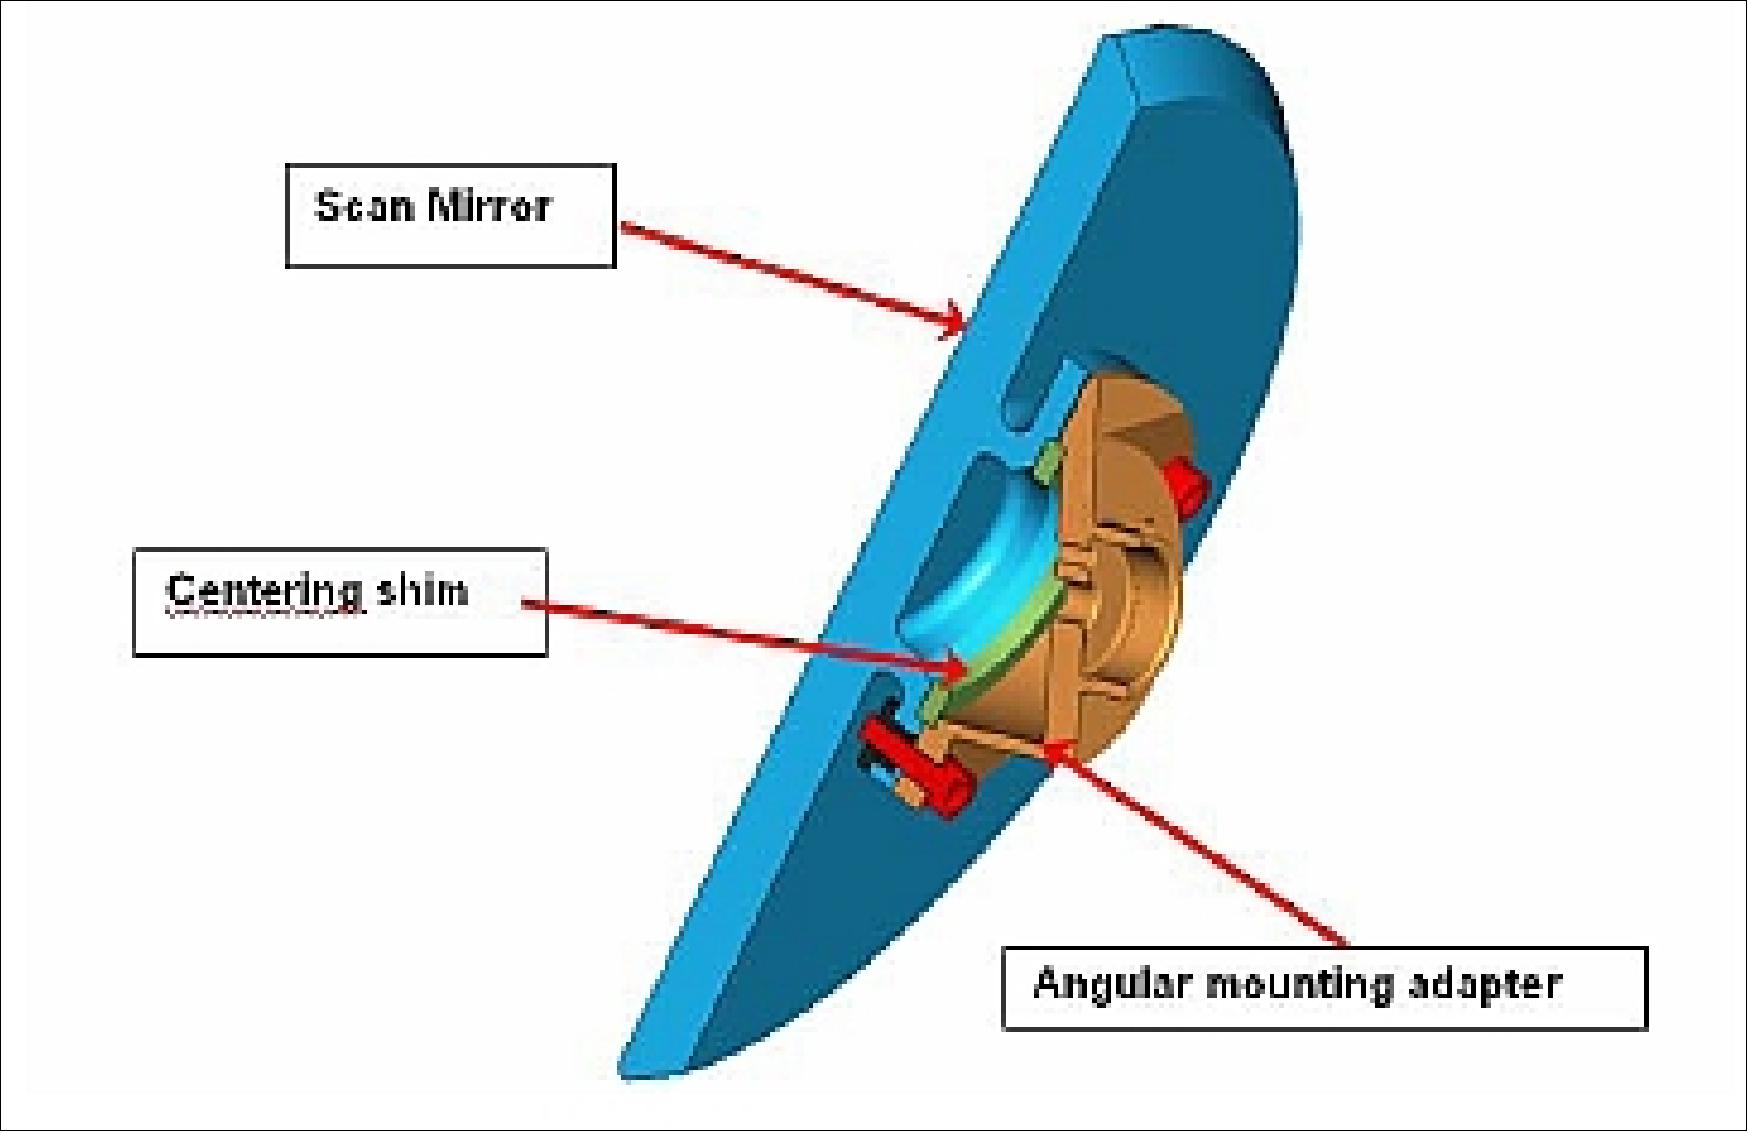 Figure 79: Structure of the scan mirror assembly (image credit: SLSTR consortium)